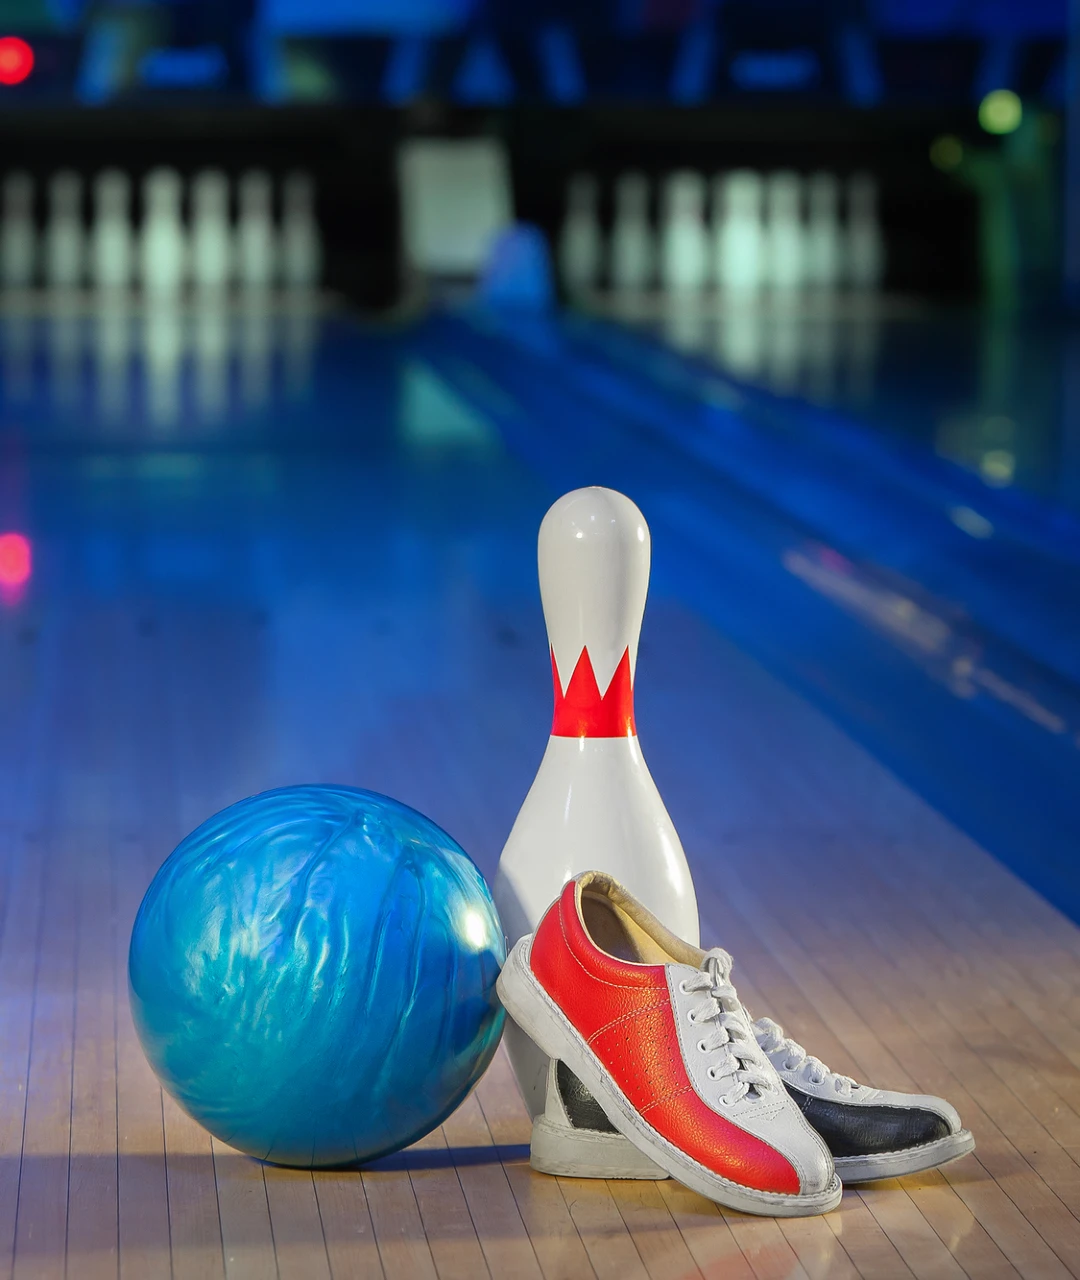 image of tenpin bowling shows, ball and lane